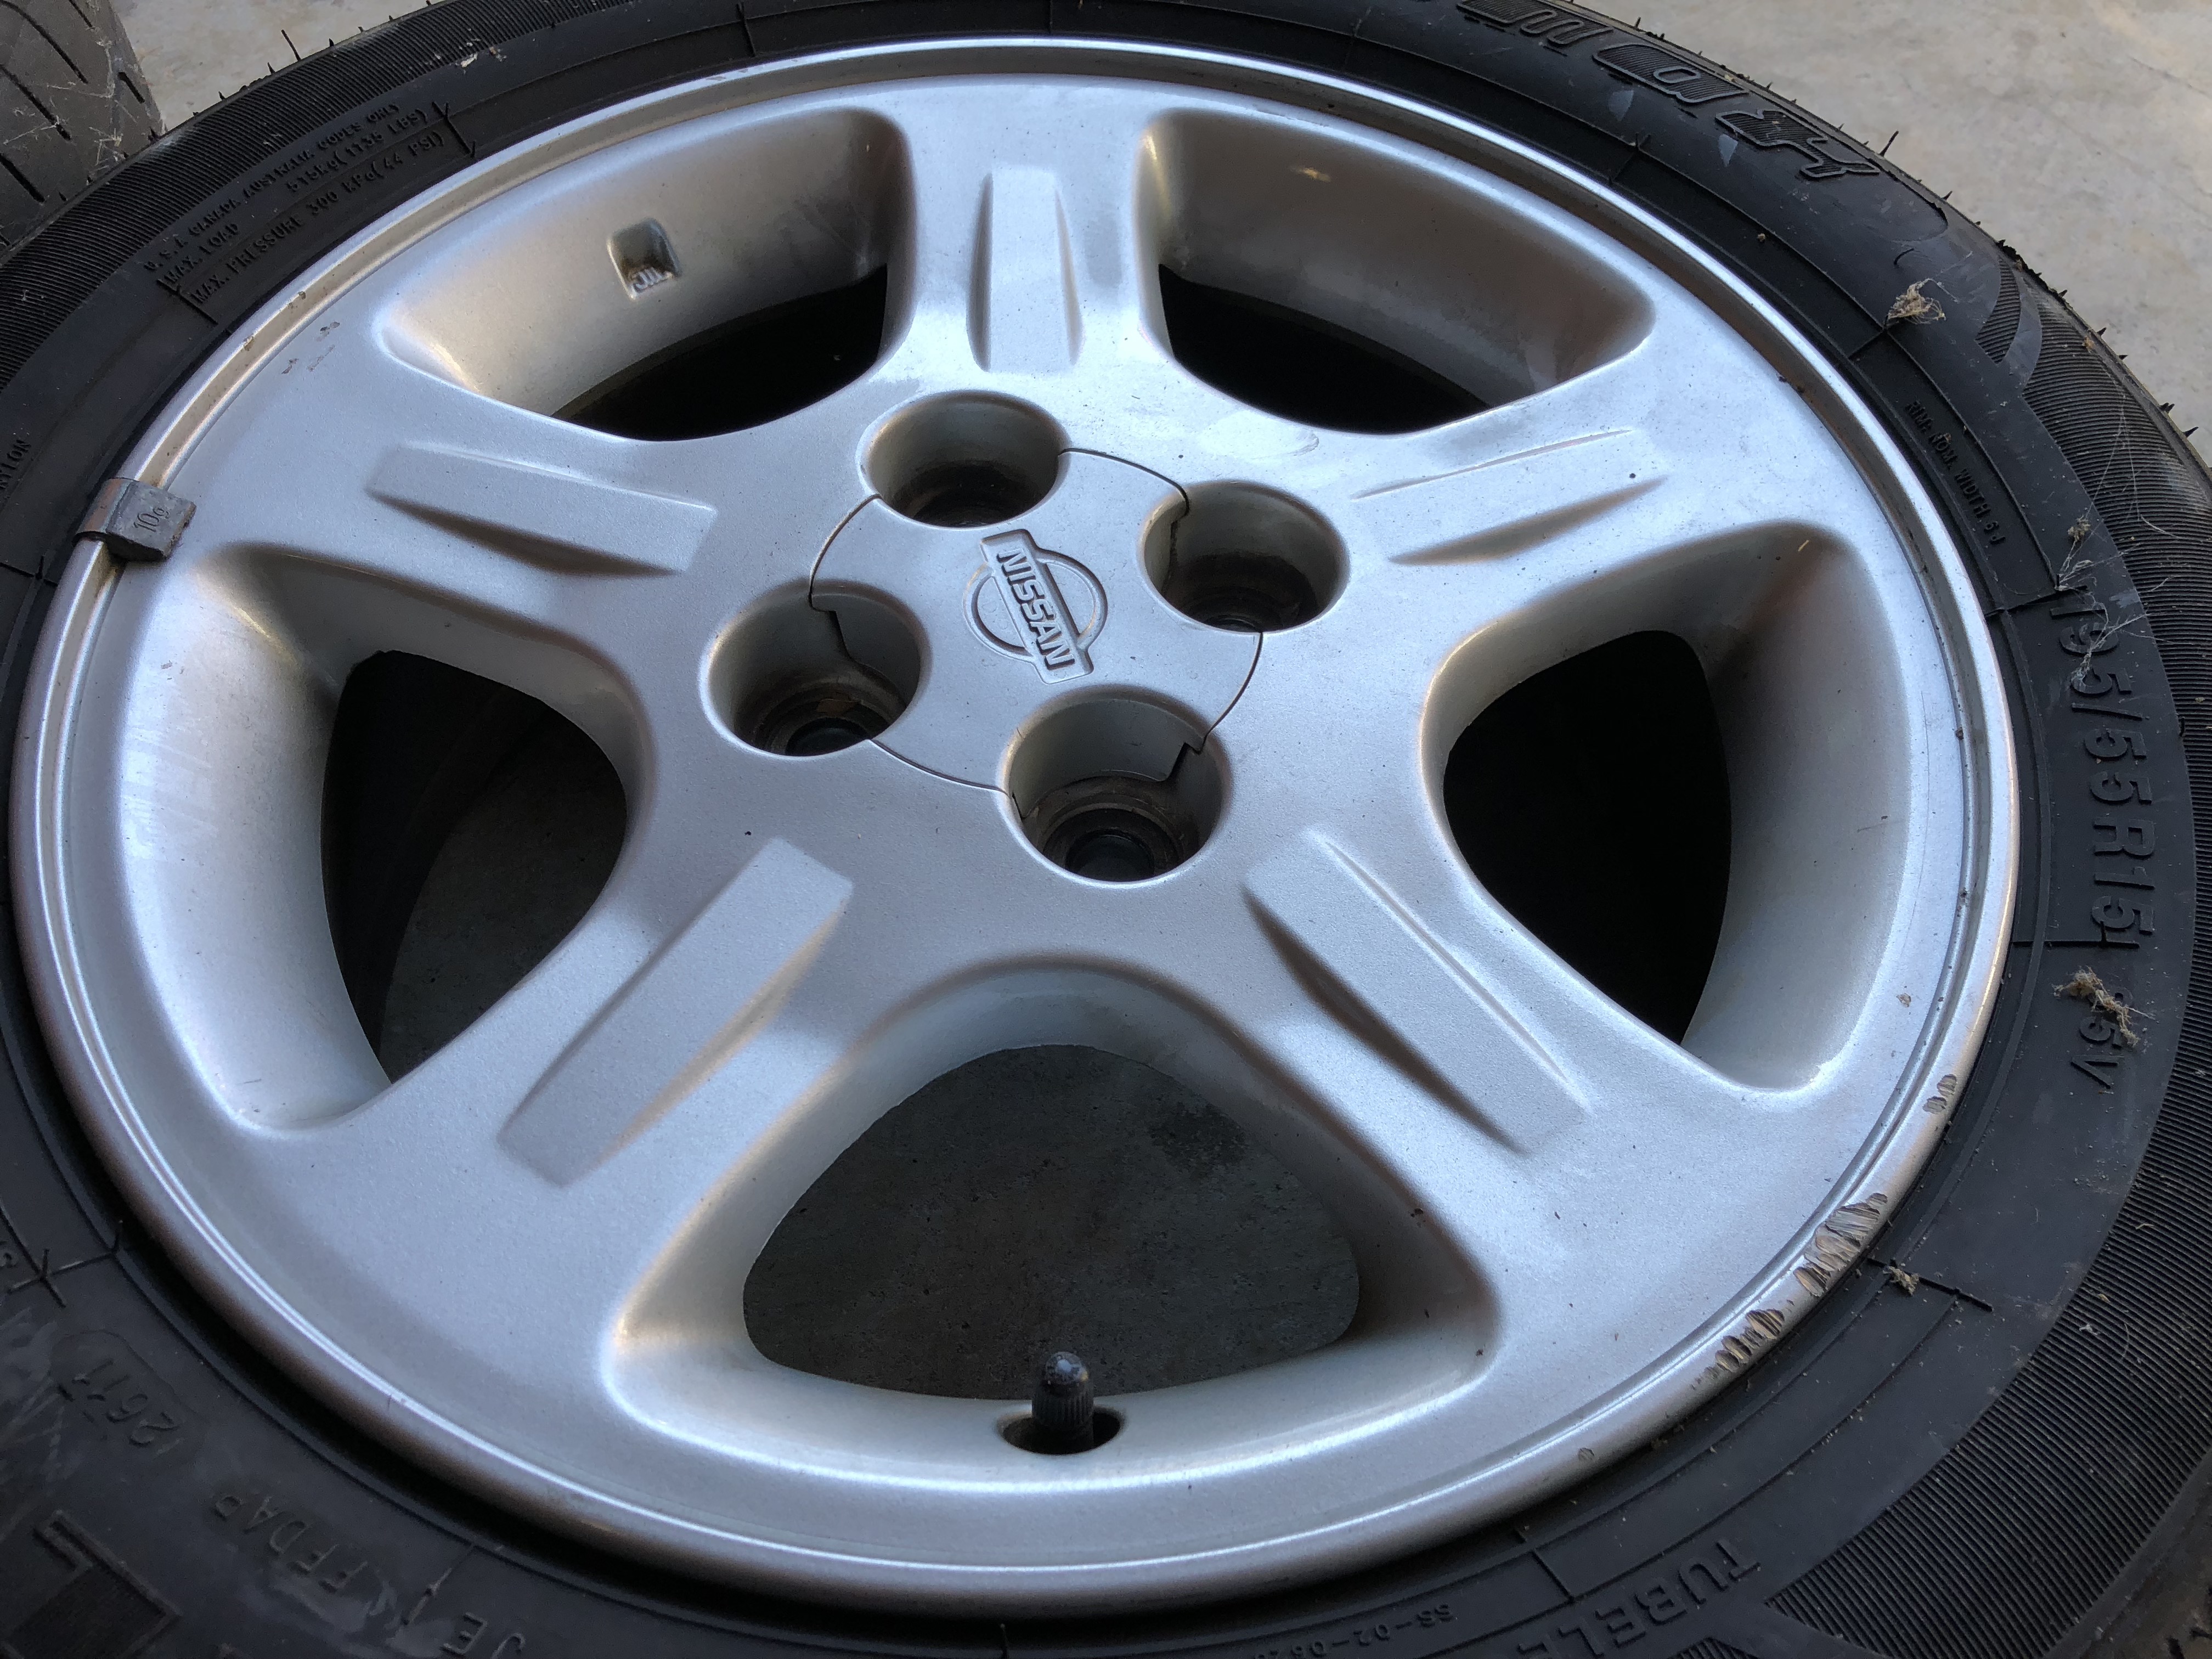 Genuine N15 Nissan Pulsar SSS Rims With Tires